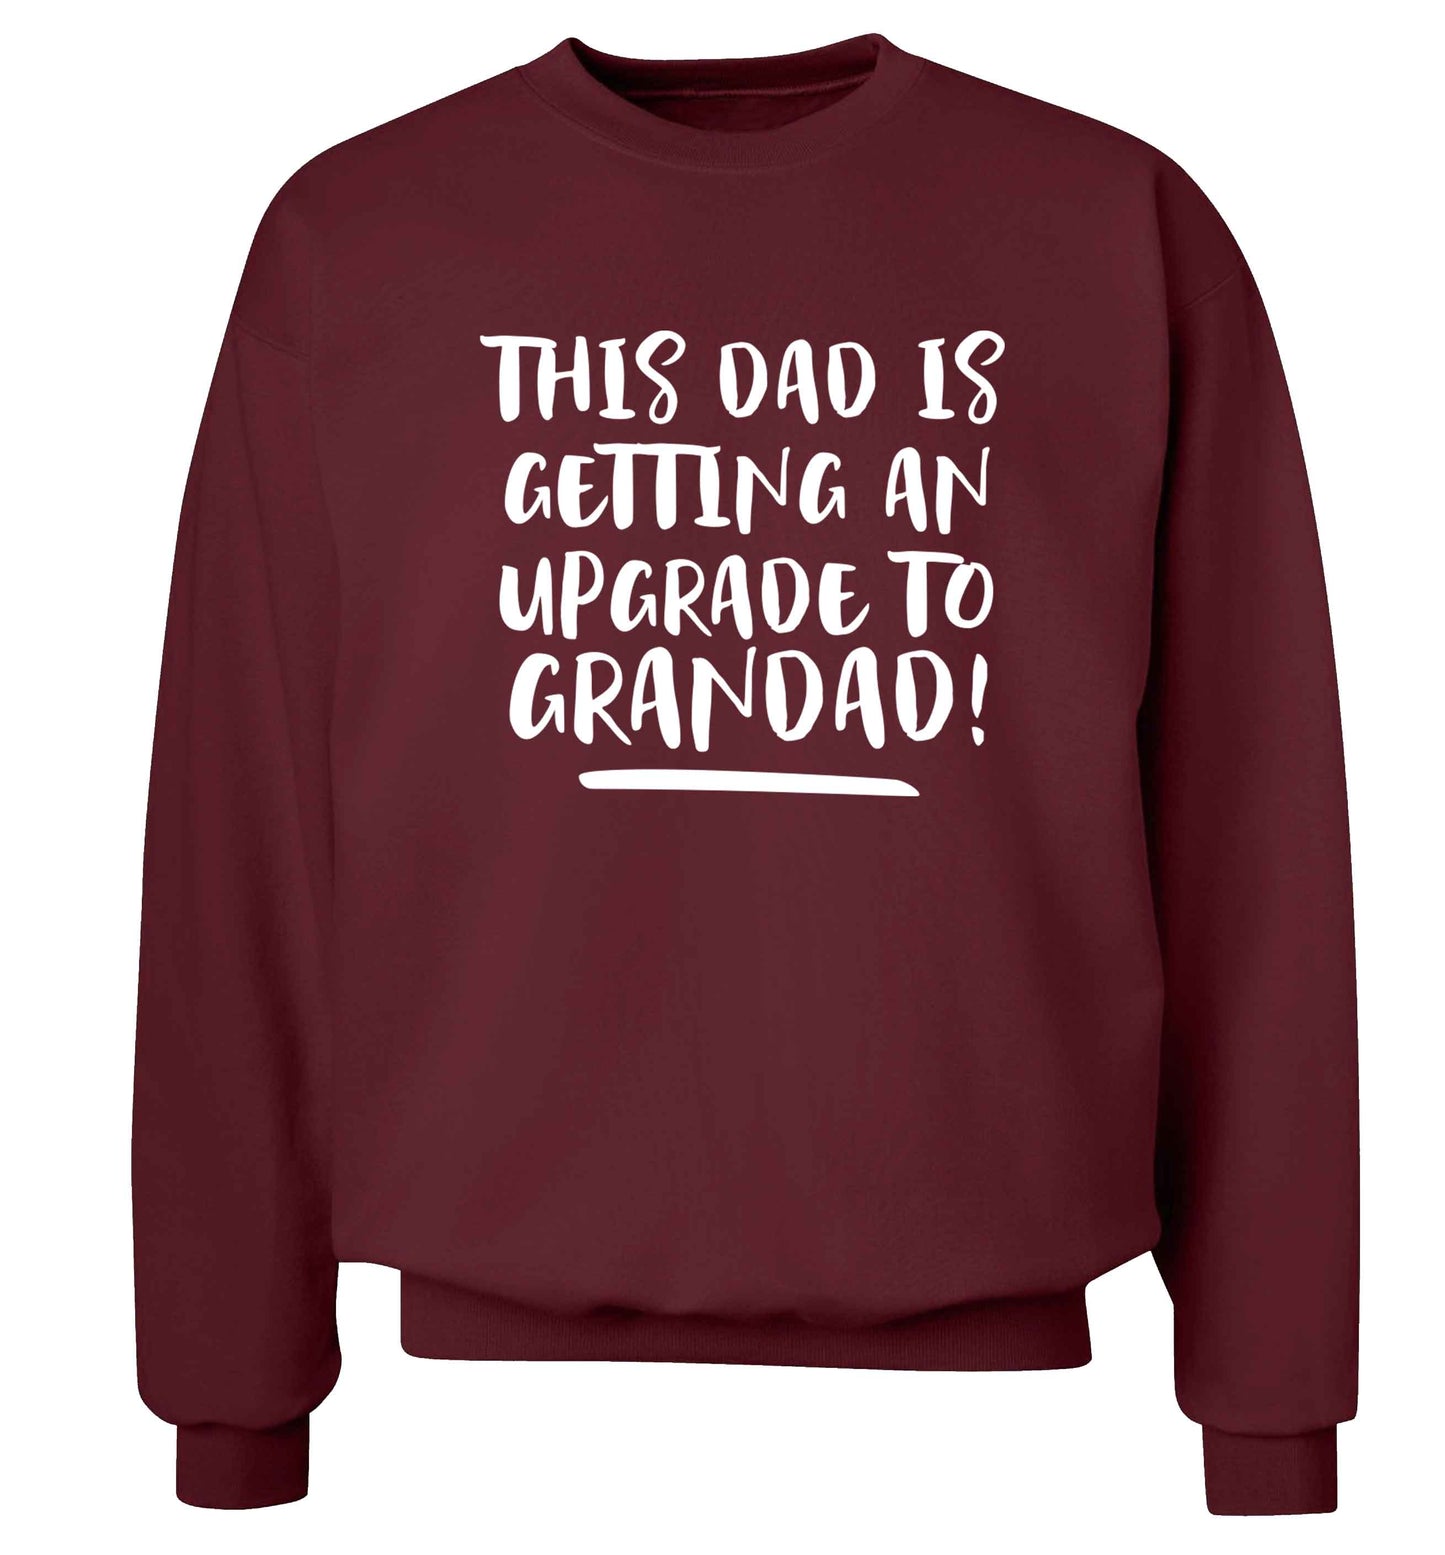 This dad is getting an upgrade to grandad! Adult's unisex maroon Sweater 2XL